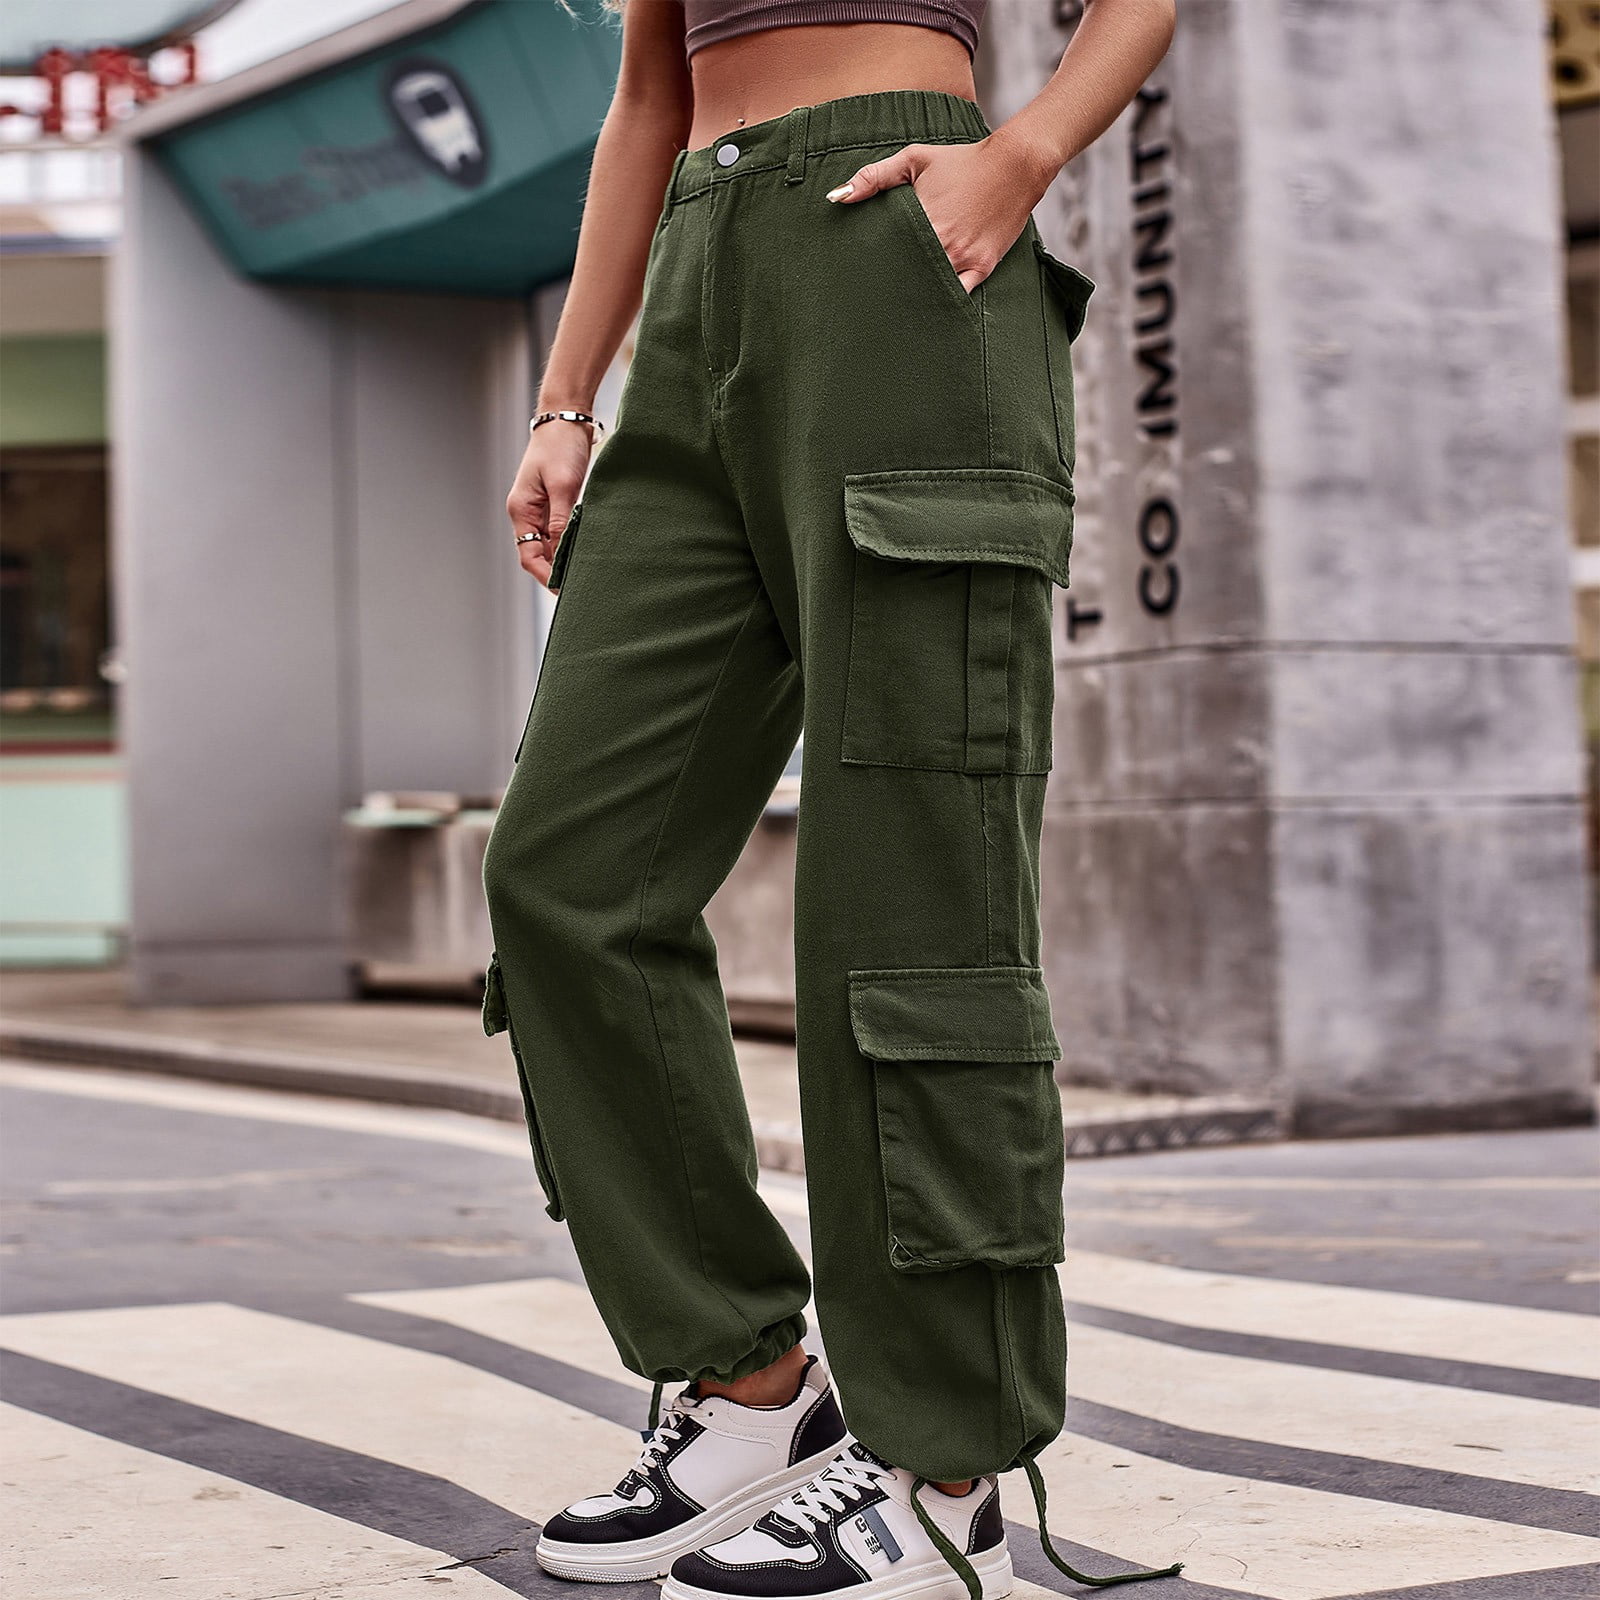 Buy GREEN CARGO PANTS Online at Best Prices in India - JioMart.